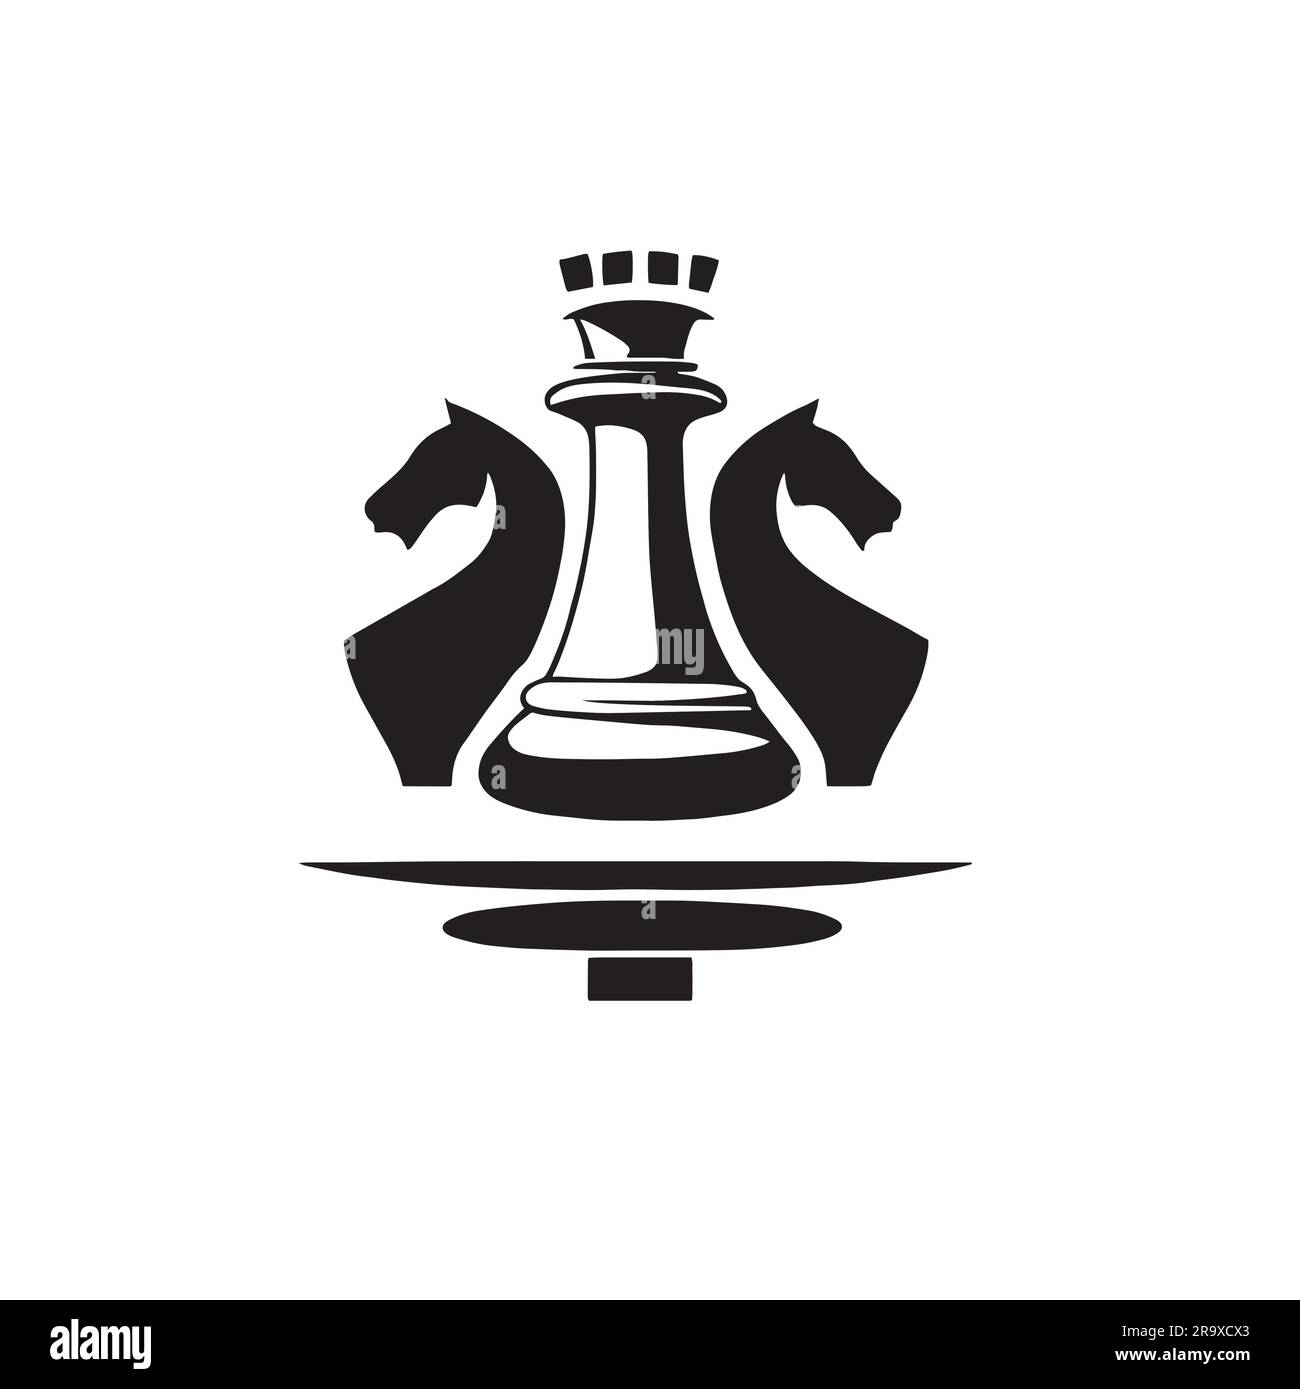 CHESS COINS Projects  Photos, videos, logos, illustrations and